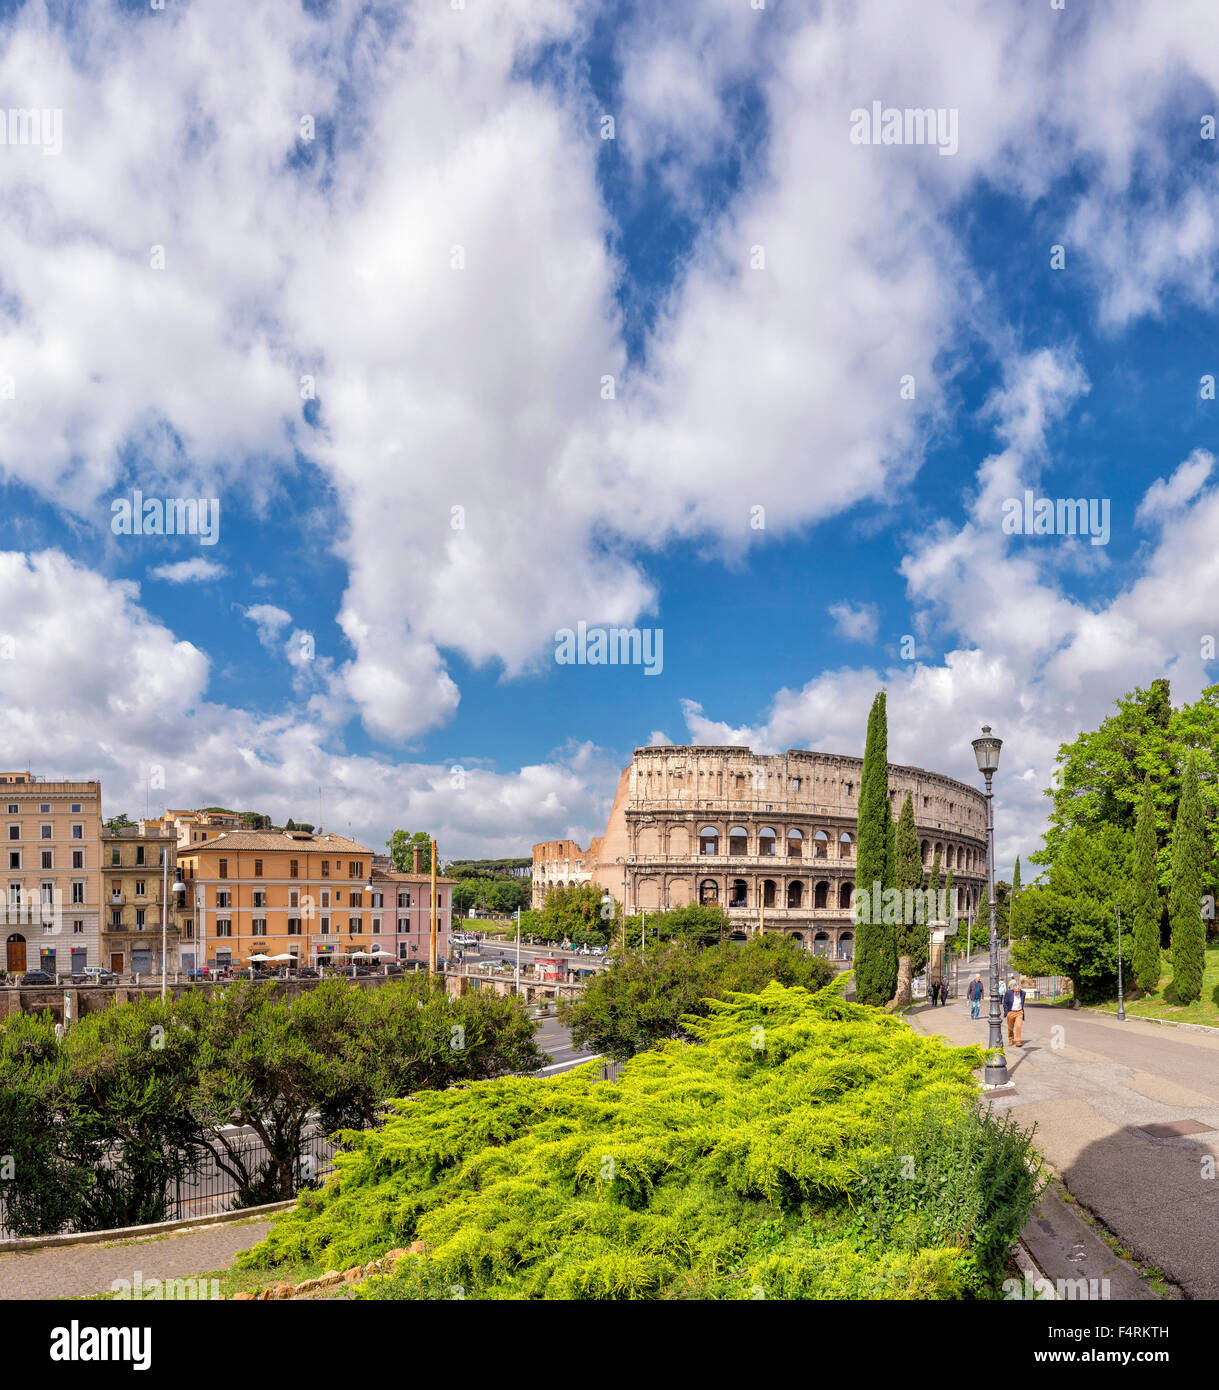 Italy, Europe, Lazio, Rome, Roma, city, village, forest, wood, trees, spring, people, Parco del Colle Oppio, Piazza del Colosseo Stock Photo